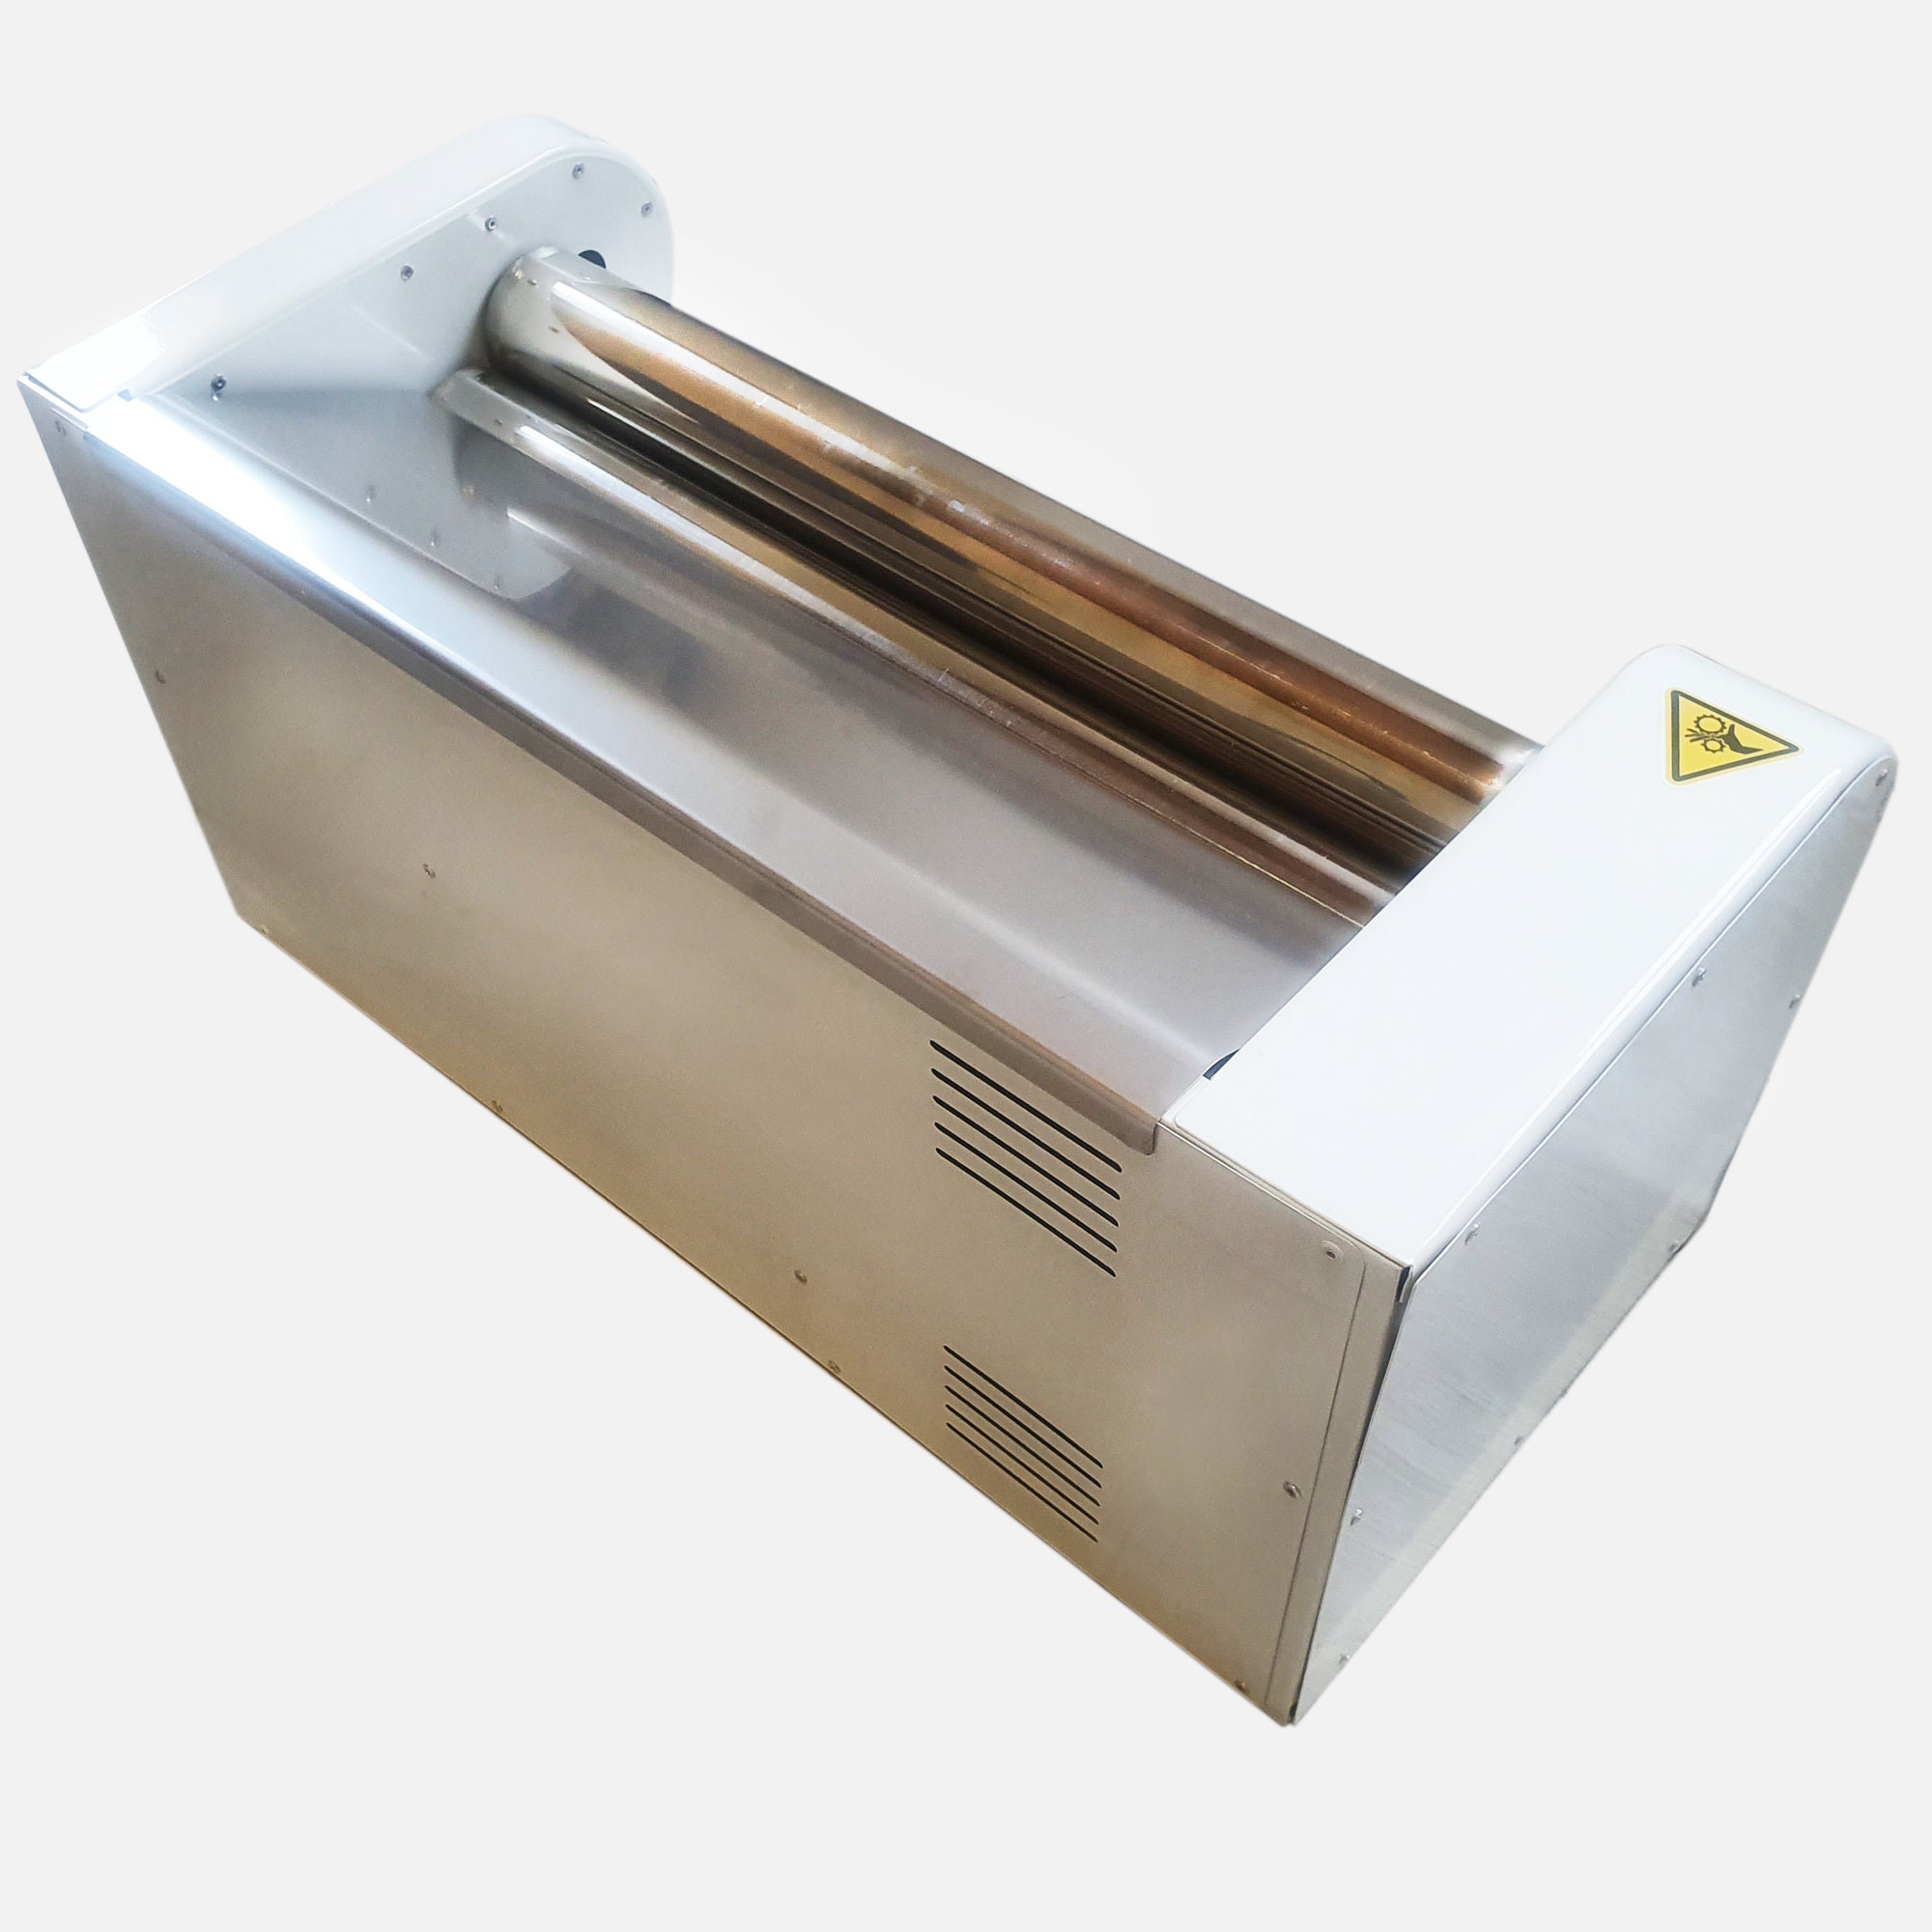 Stainless Steel Electric Pasta Sheeter with 8.25″ Roller Length